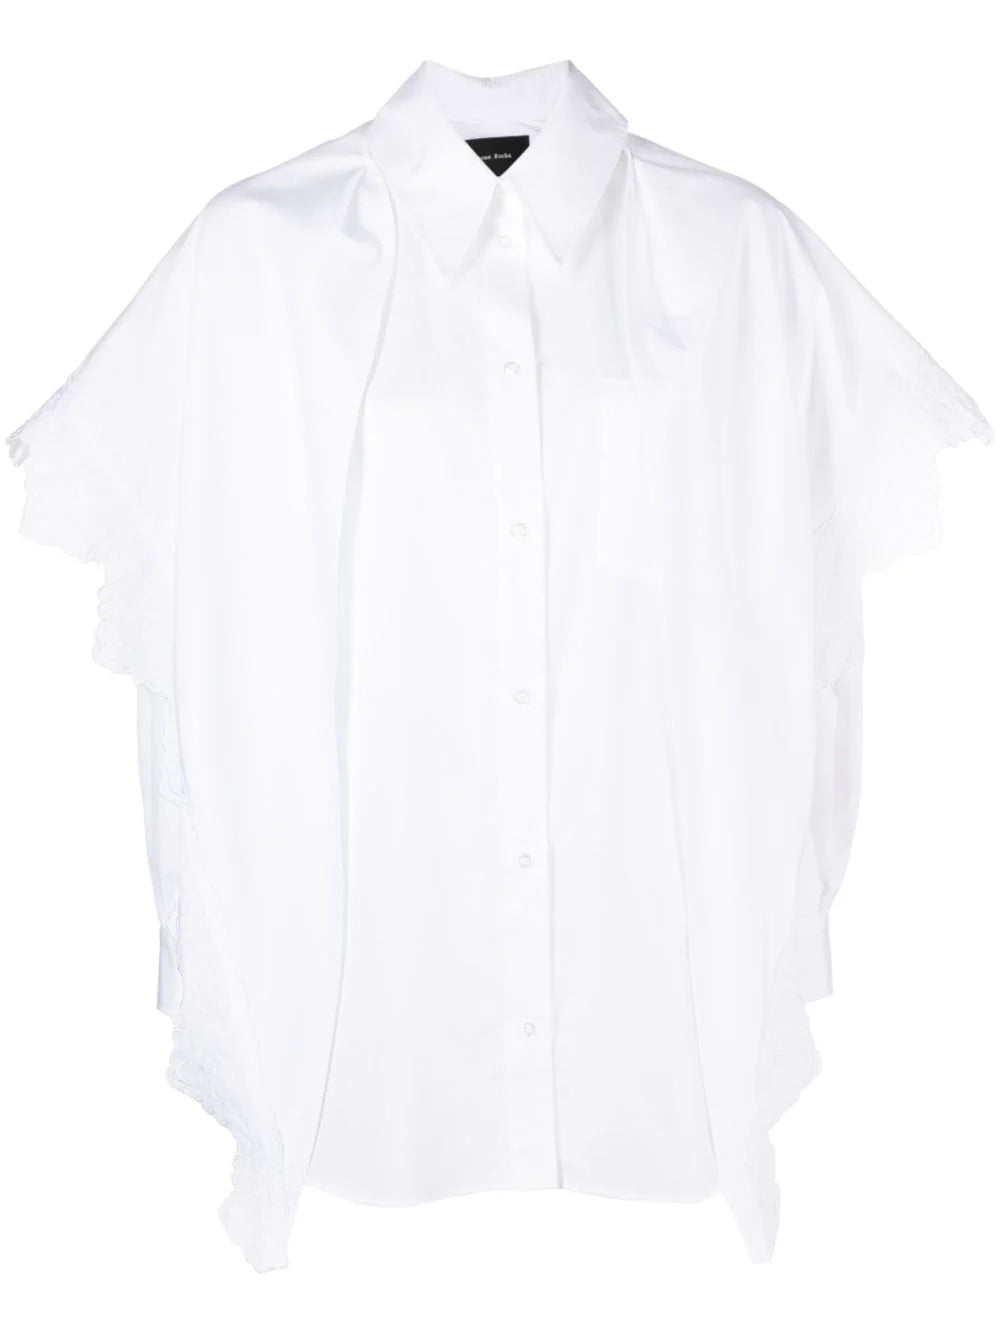 POINTED COLLAR EMBROIDERED SHIRT - SHEET-1